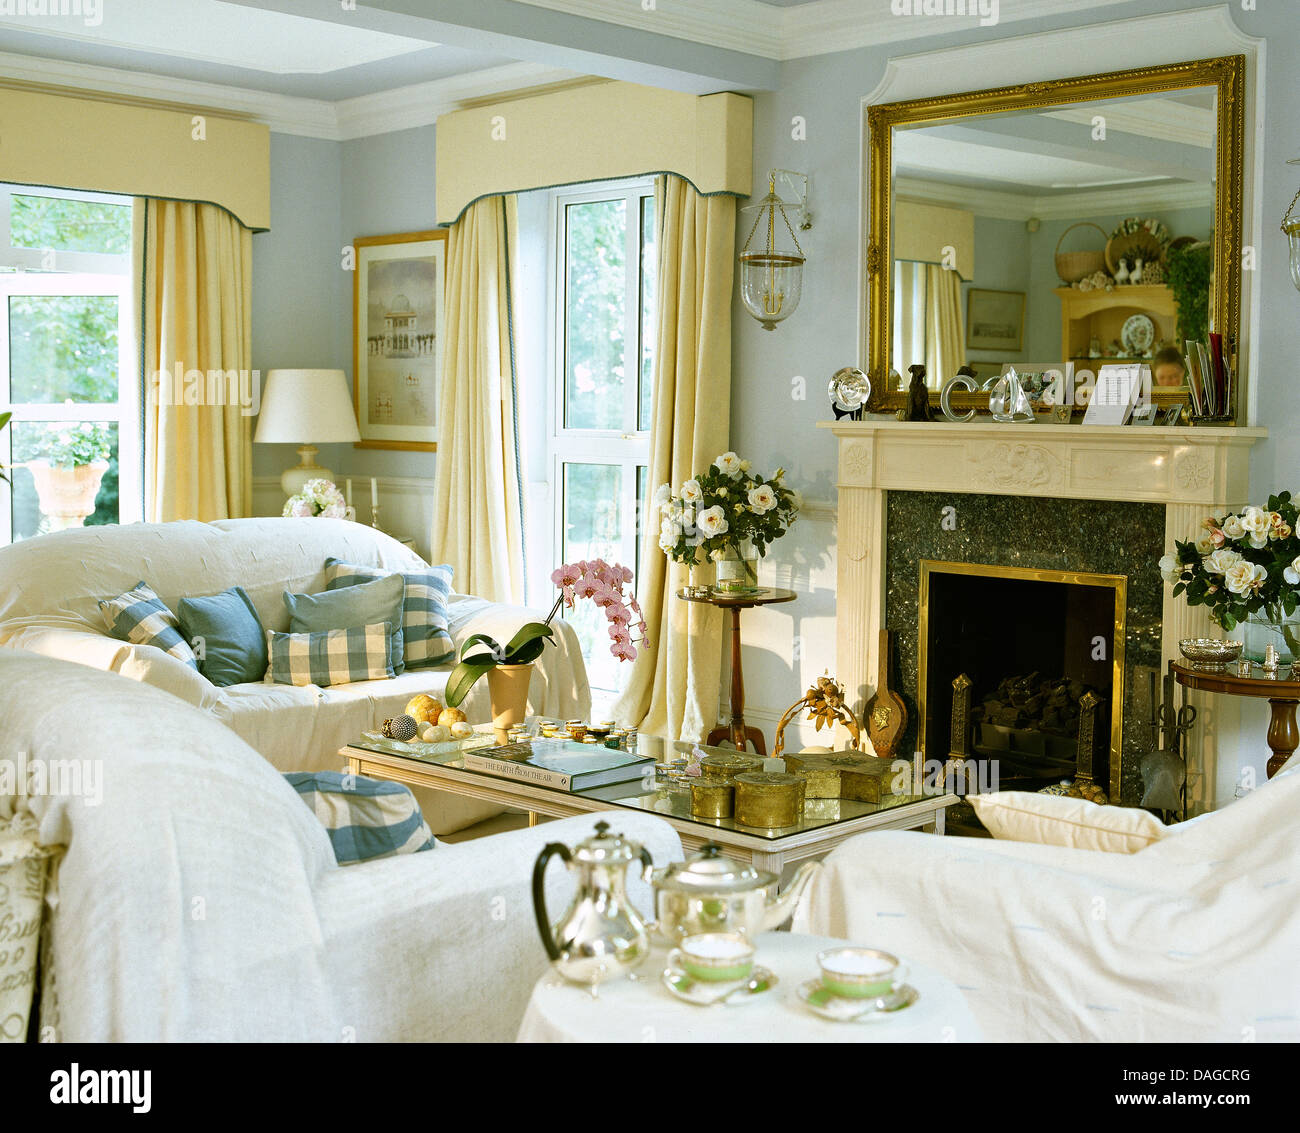 White throws on sofas in pale blue living room with large mirror above  fireplace and cream drapes on windows Stock Photo - Alamy